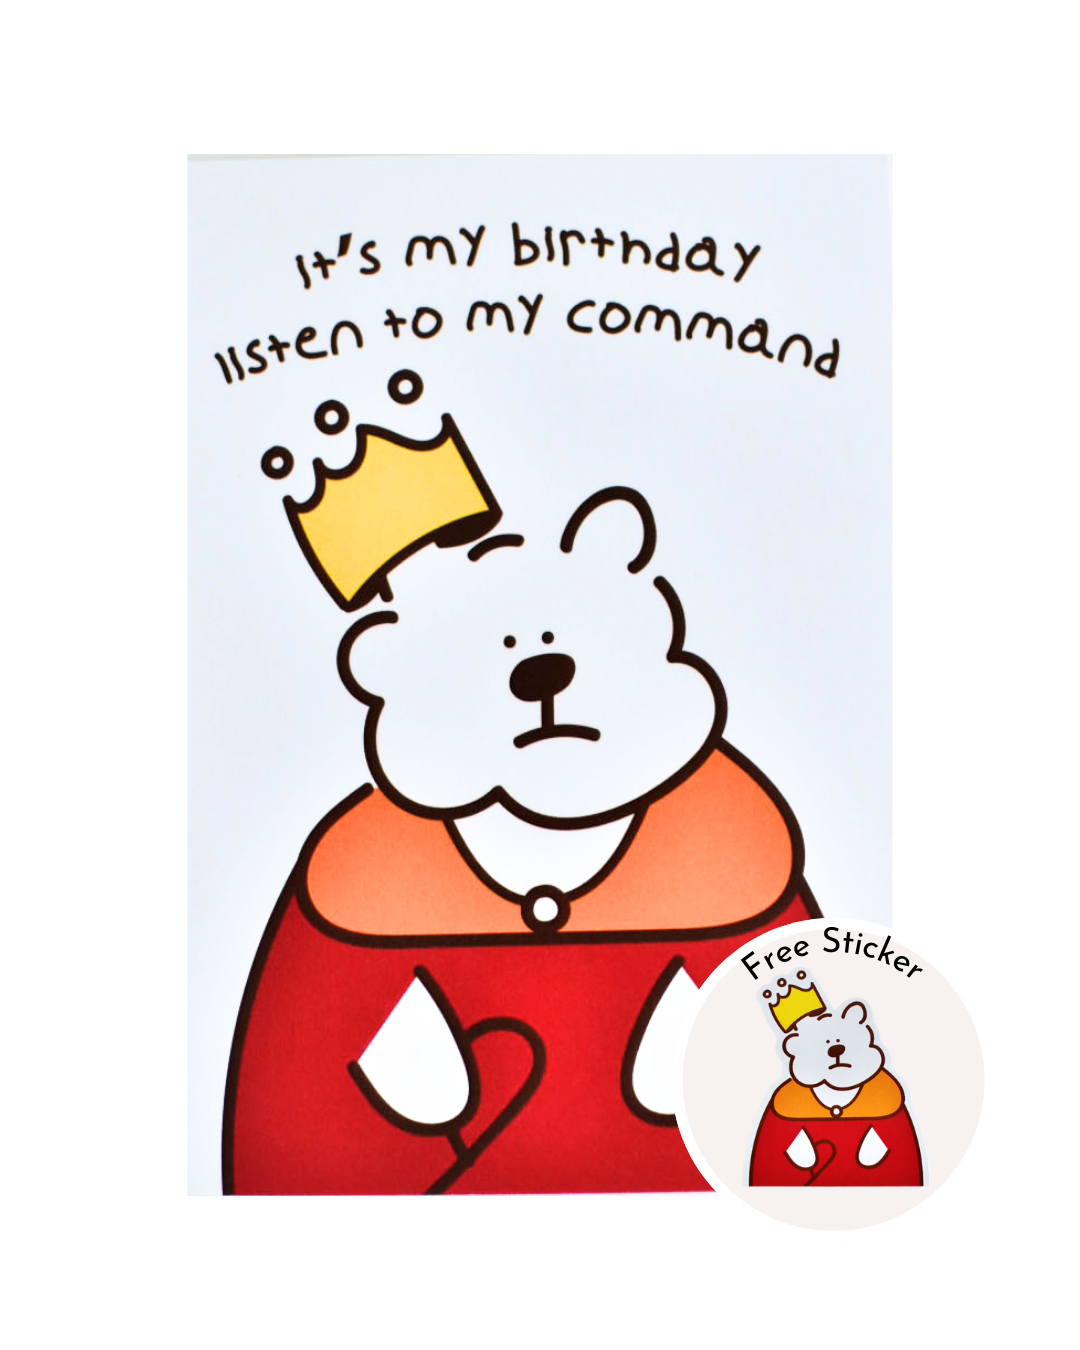 Dawg is the King Birthday Card